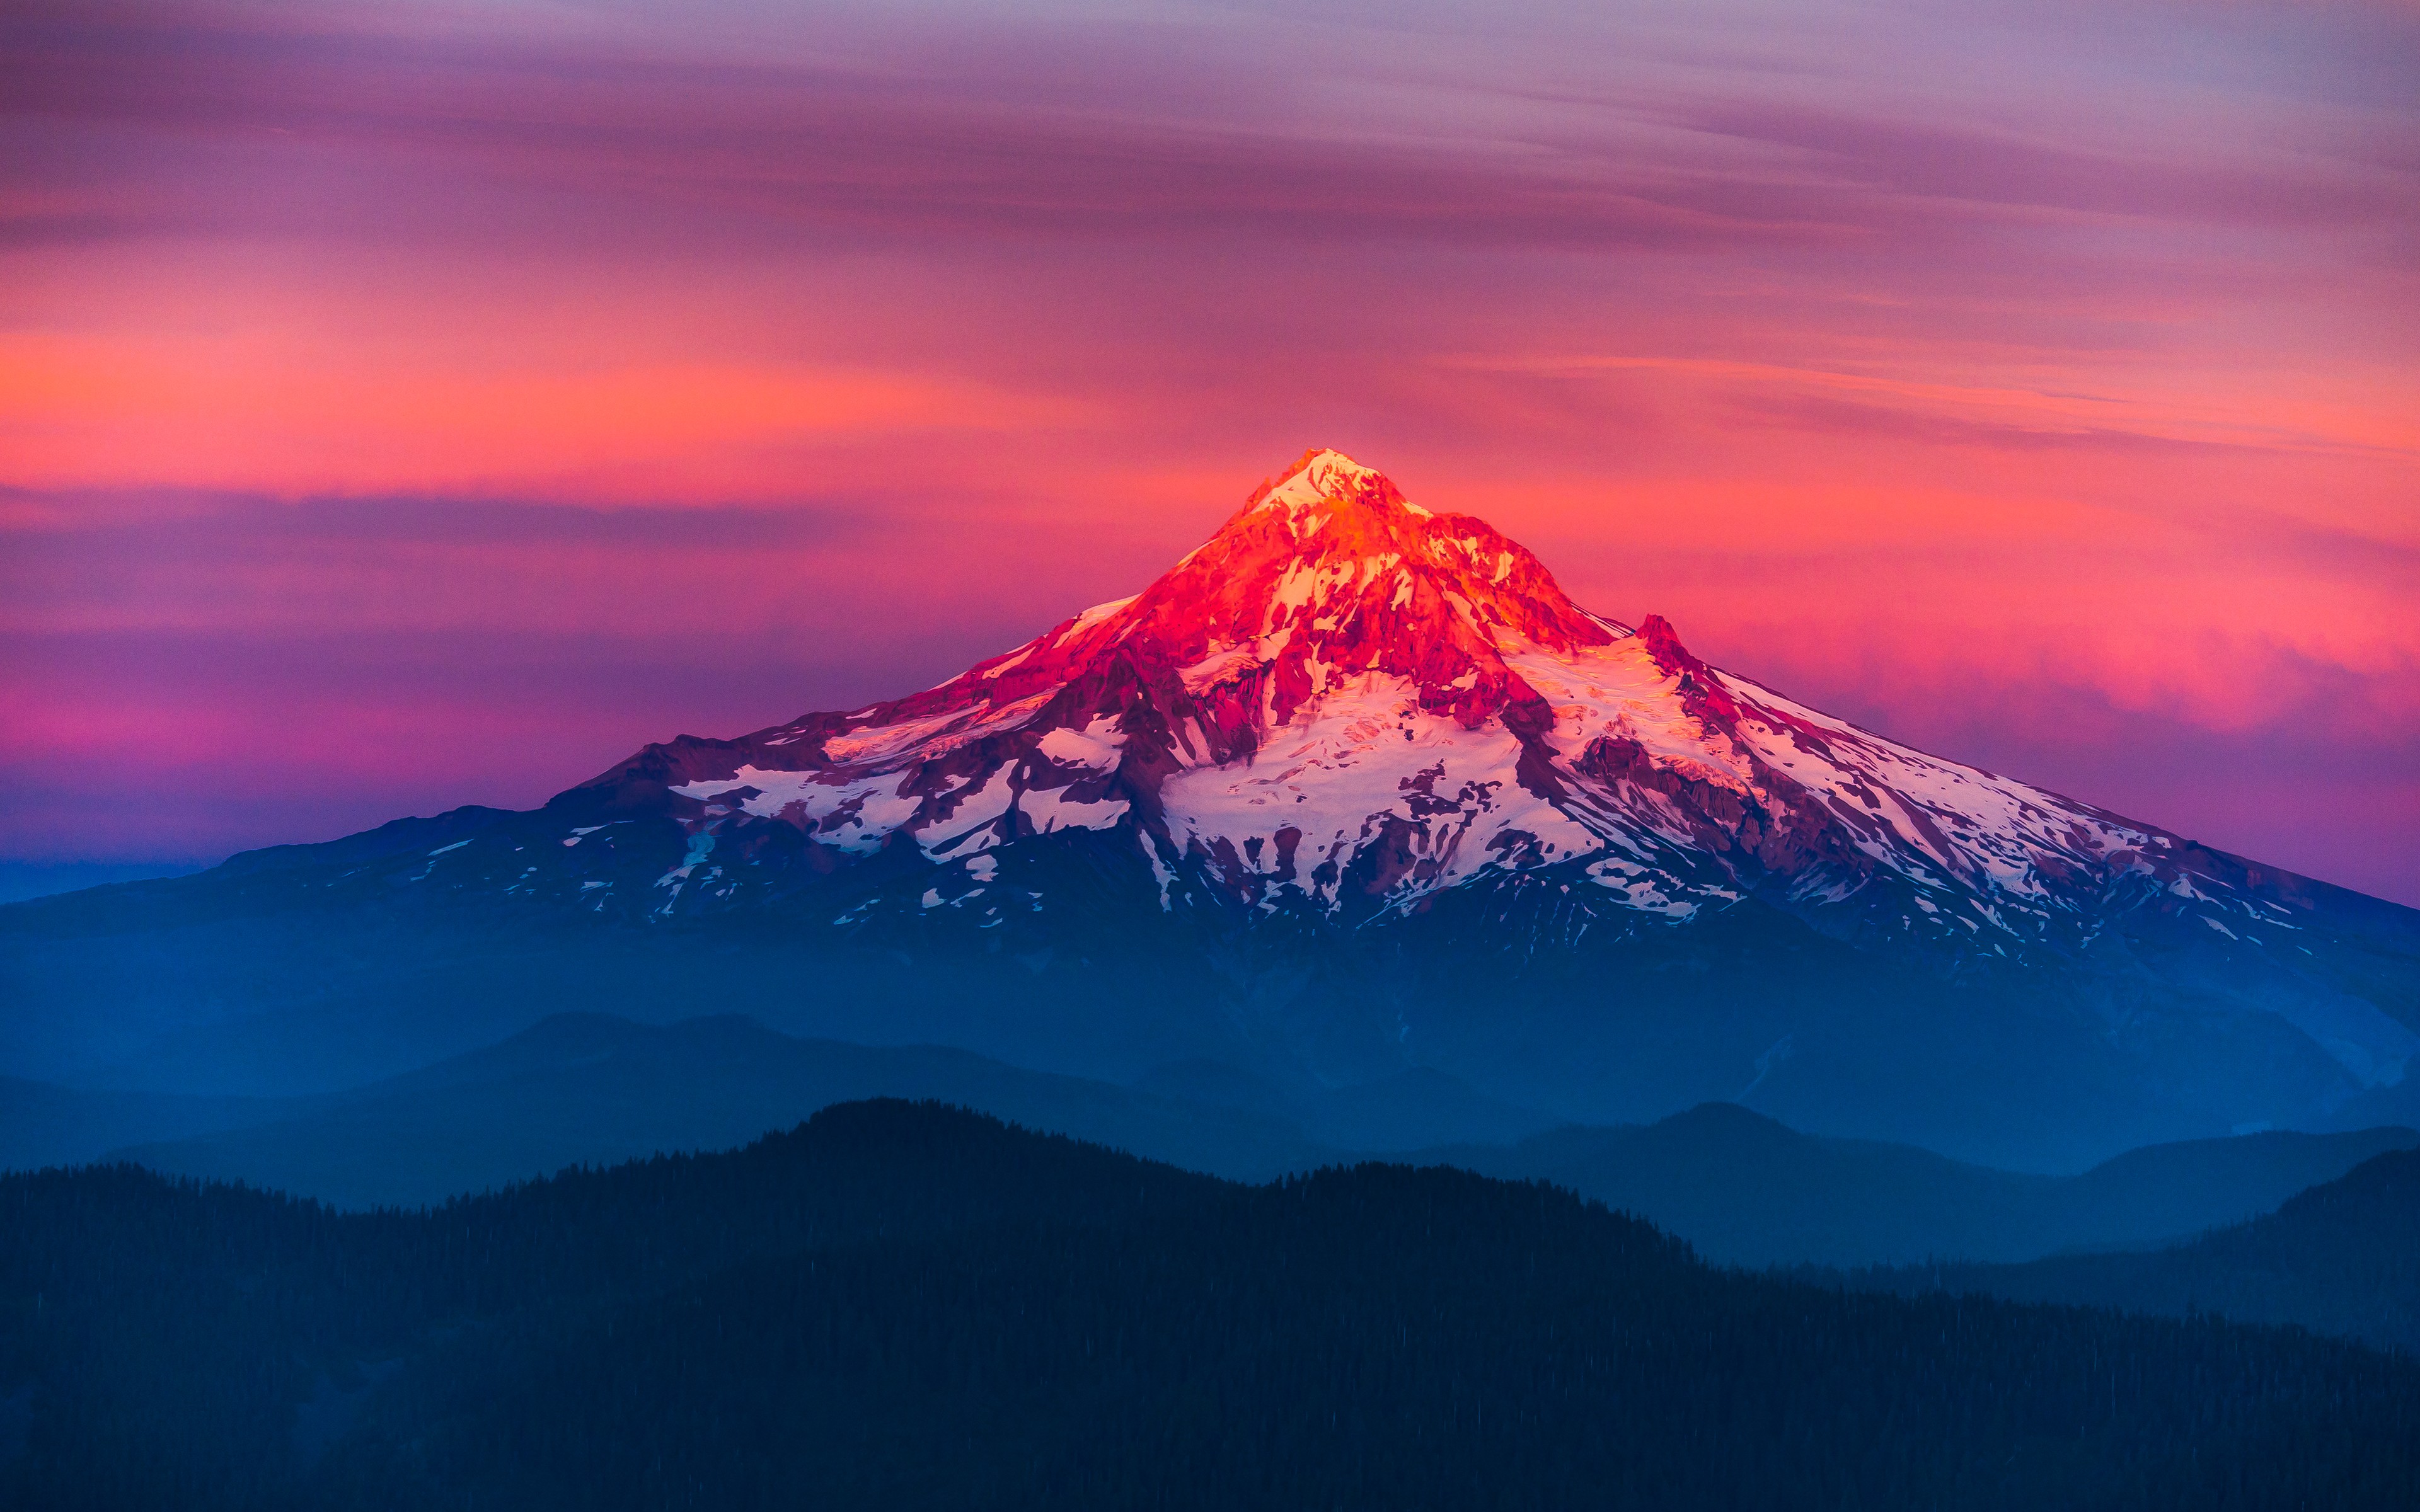 General 3840x2400 mountains sunset landscape Mount Hood larch mountain Oregon colorful sky USA